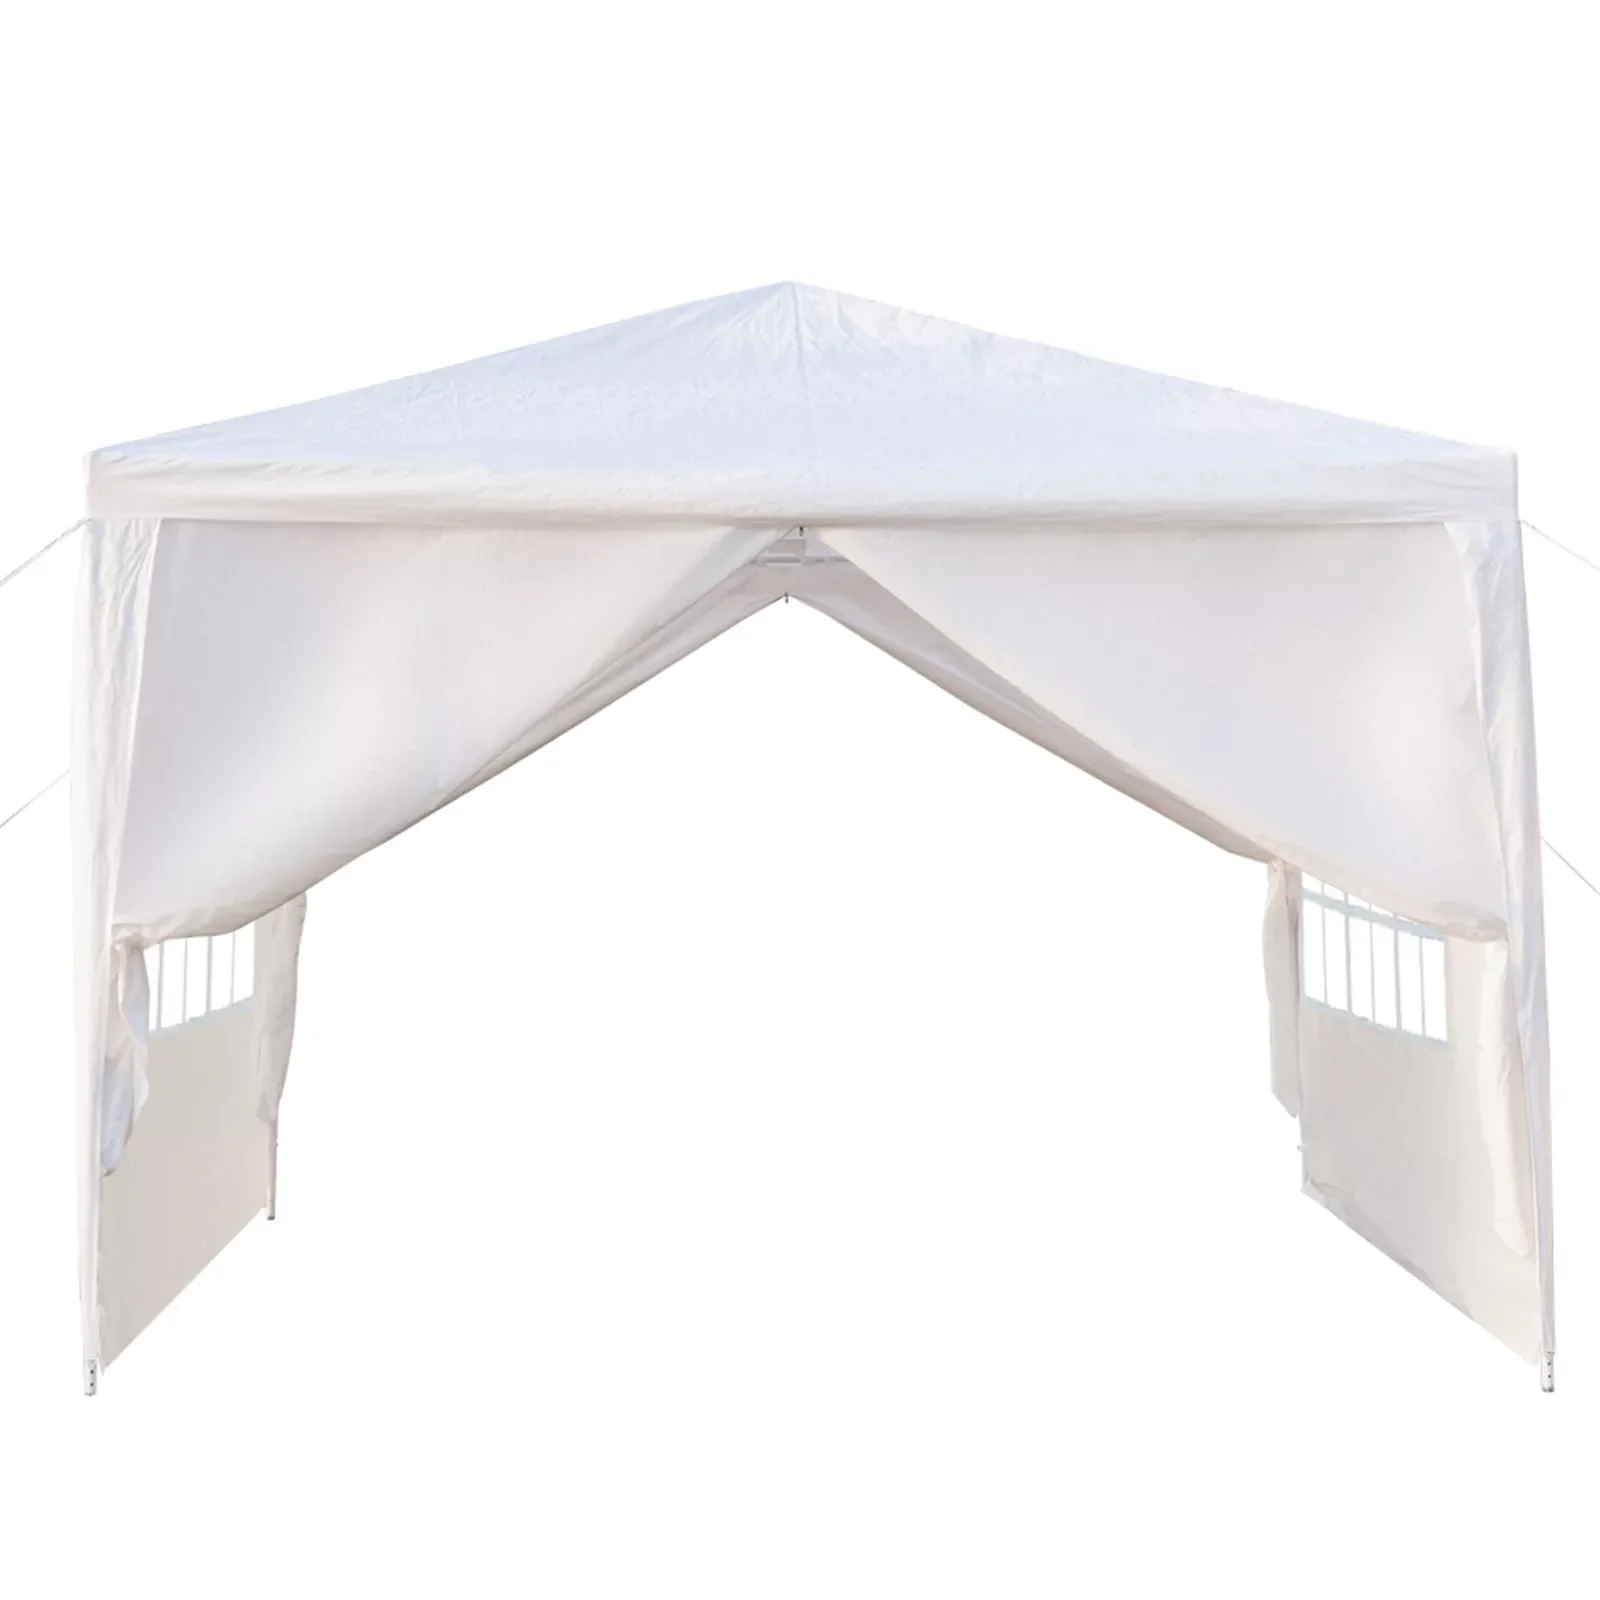 3x3m Four Sides Outdoor Awnings Portable Home Use Camping Waterproof Tent With Spiral Tubes White Pergola Fast Delivery